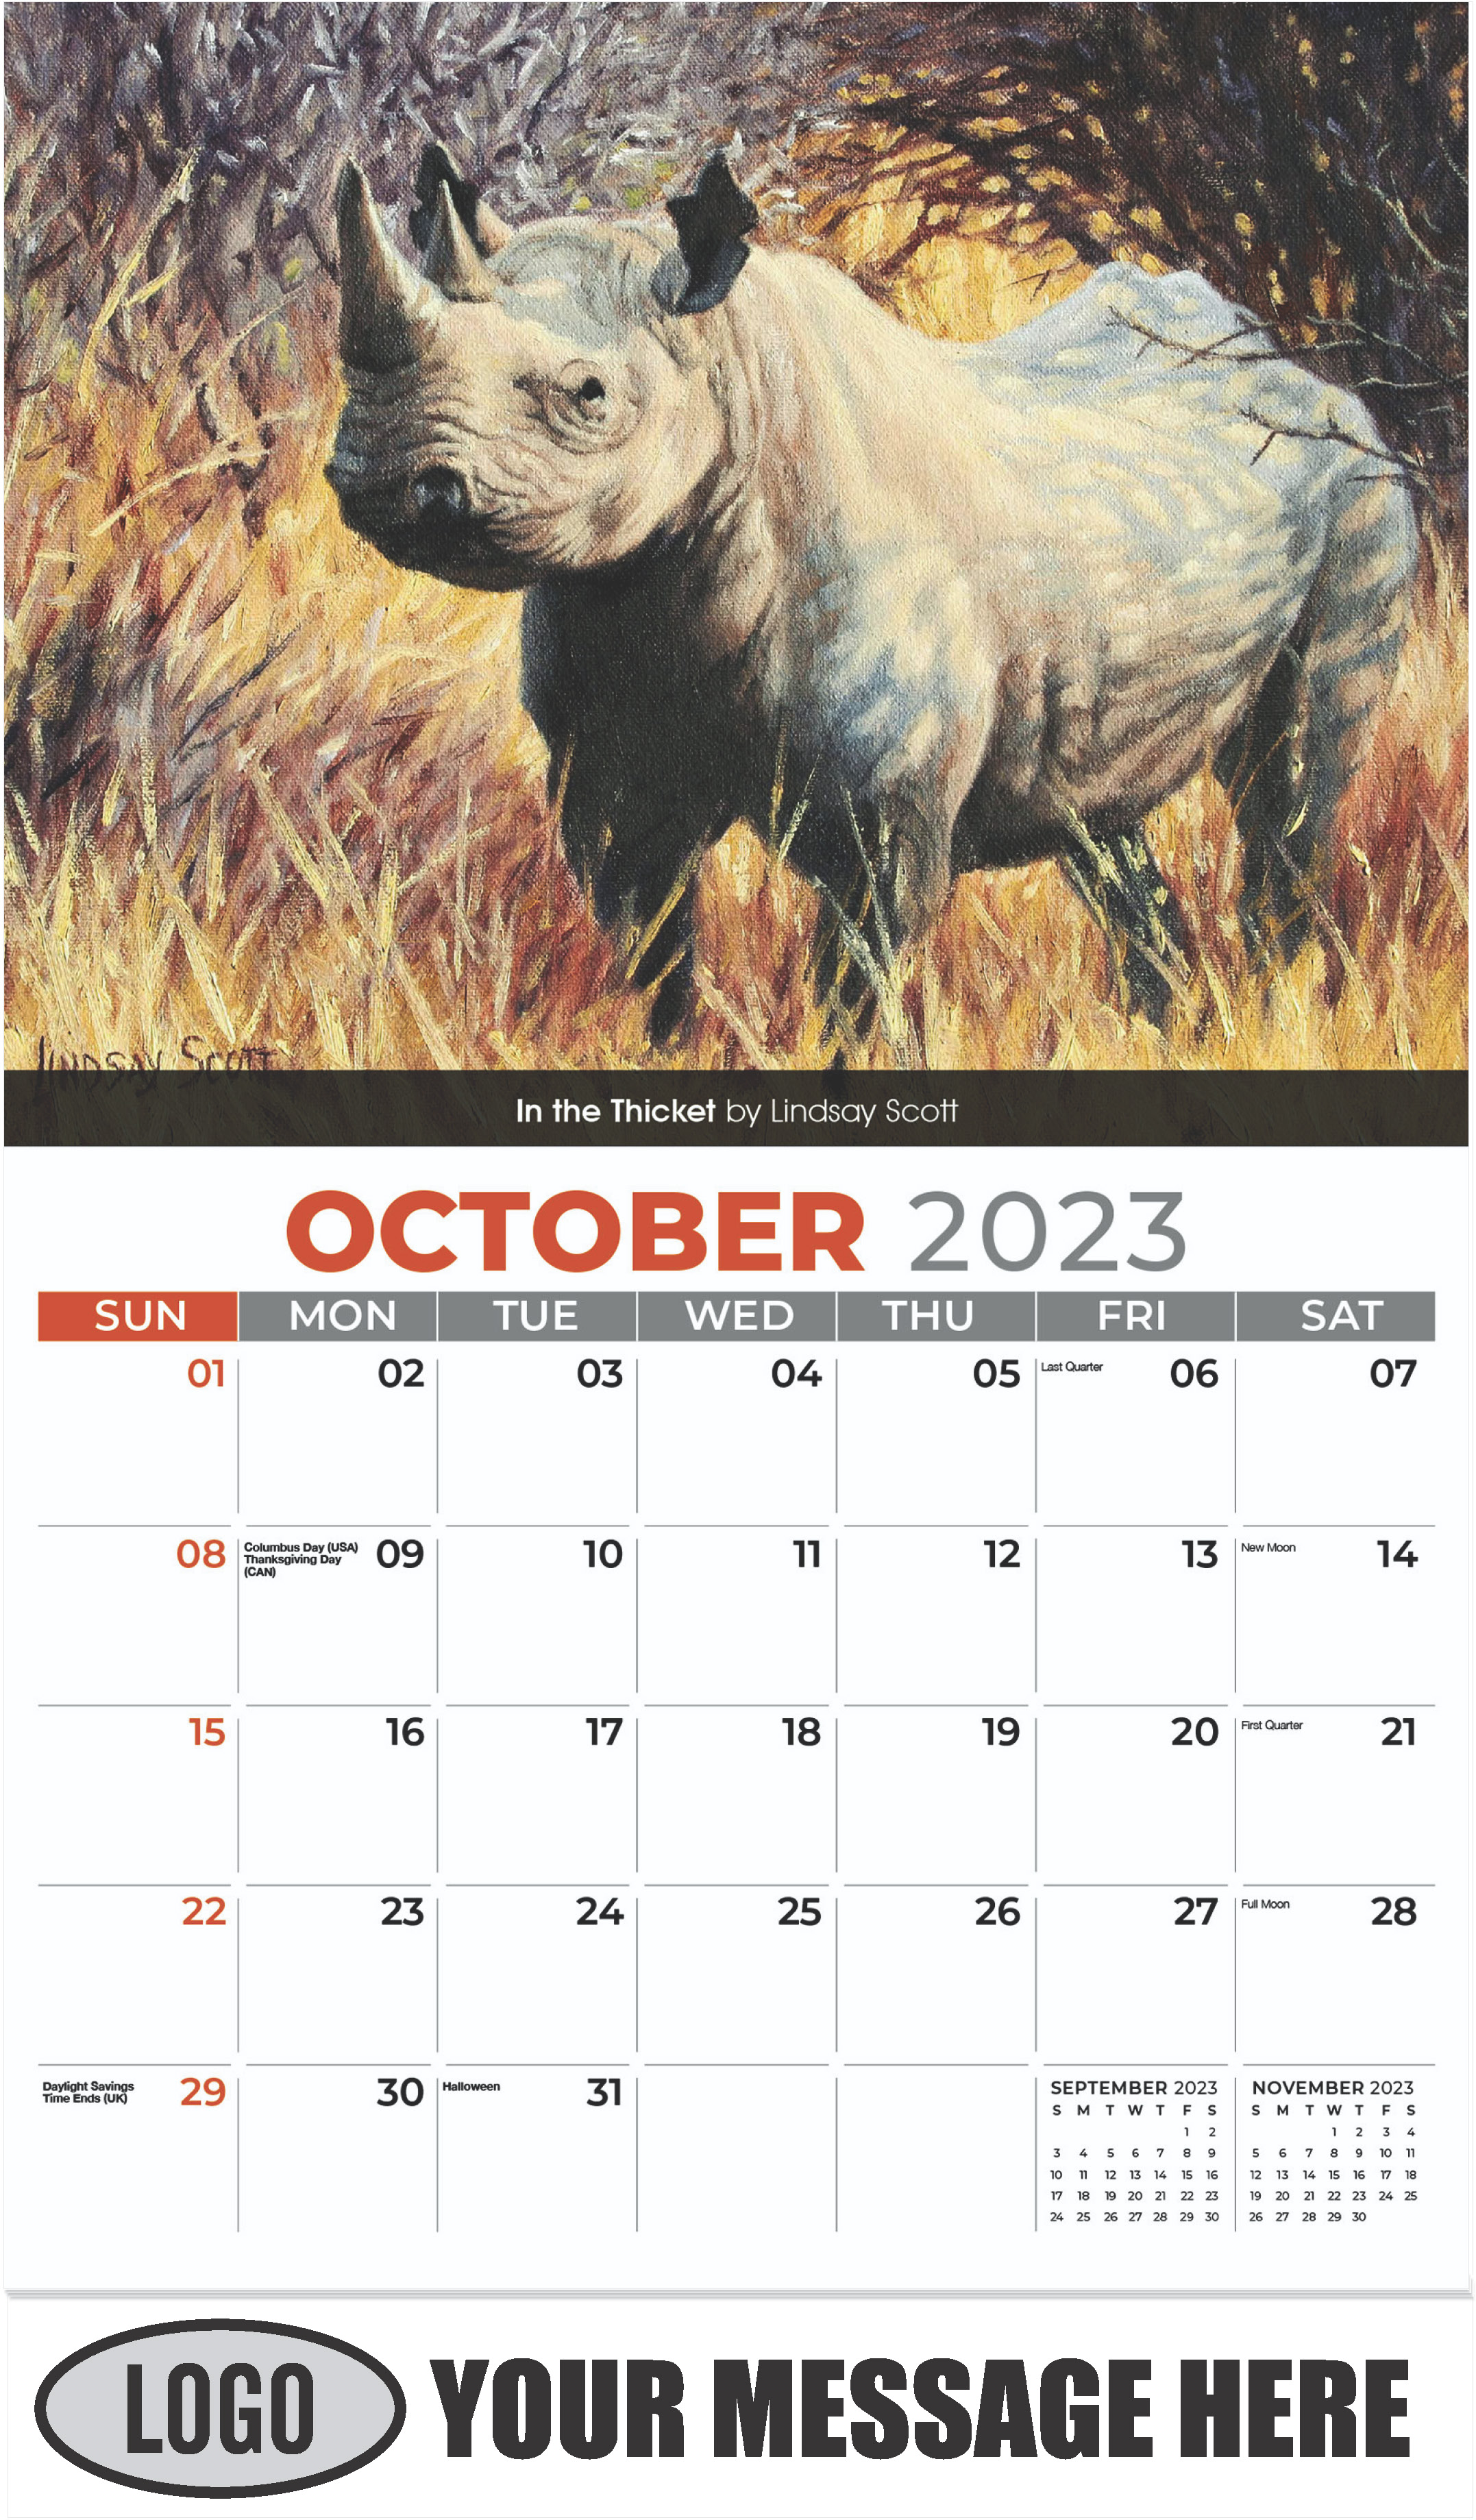 In the Thicket by Lindsay Scott - October - Wildlife Portraits 2023 Promotional Calendar